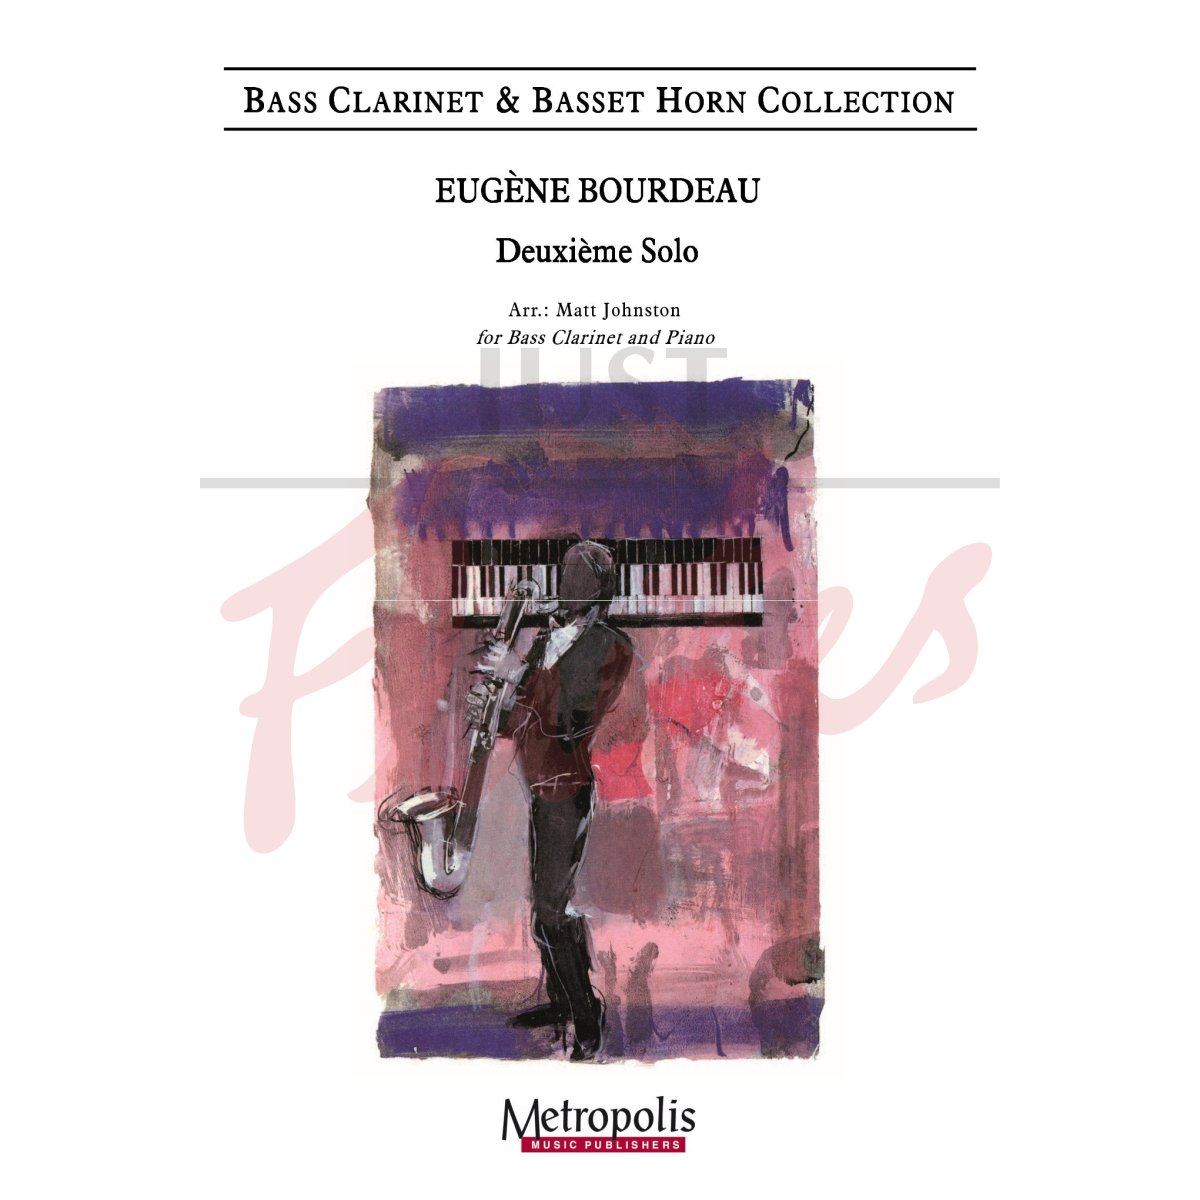 Deuxieme Solo for Bass Clarinet and Piano